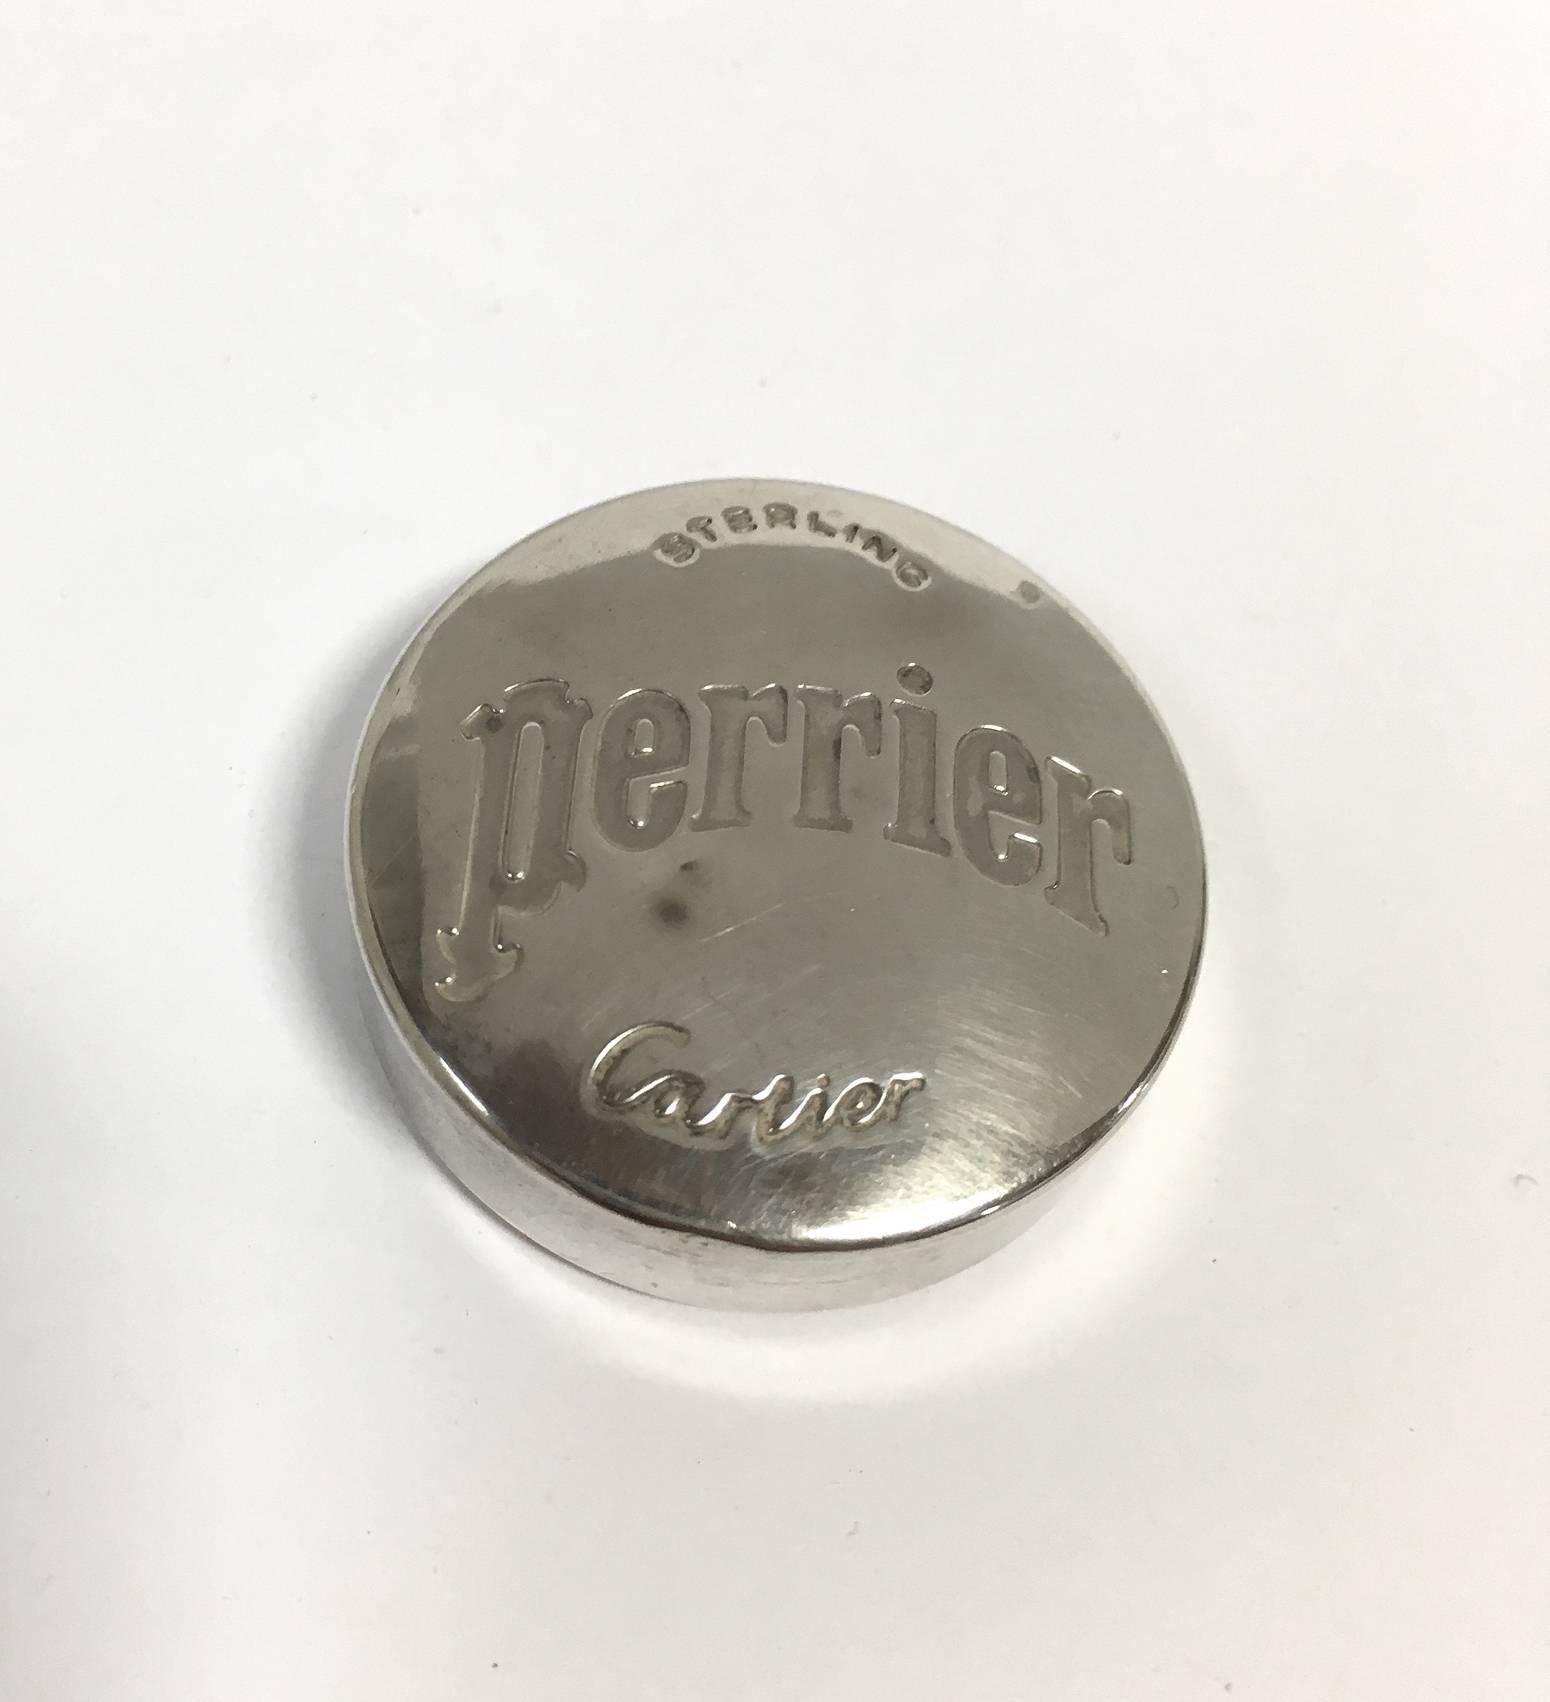 Chic bottle opener and cap set in sterling silver by Cartier Paris, carrying both the Perrier and Cartier branding. Neither of these brands needs an introduction. What is perhaps most peculiar about the item is it's collaborative nature. The bottle